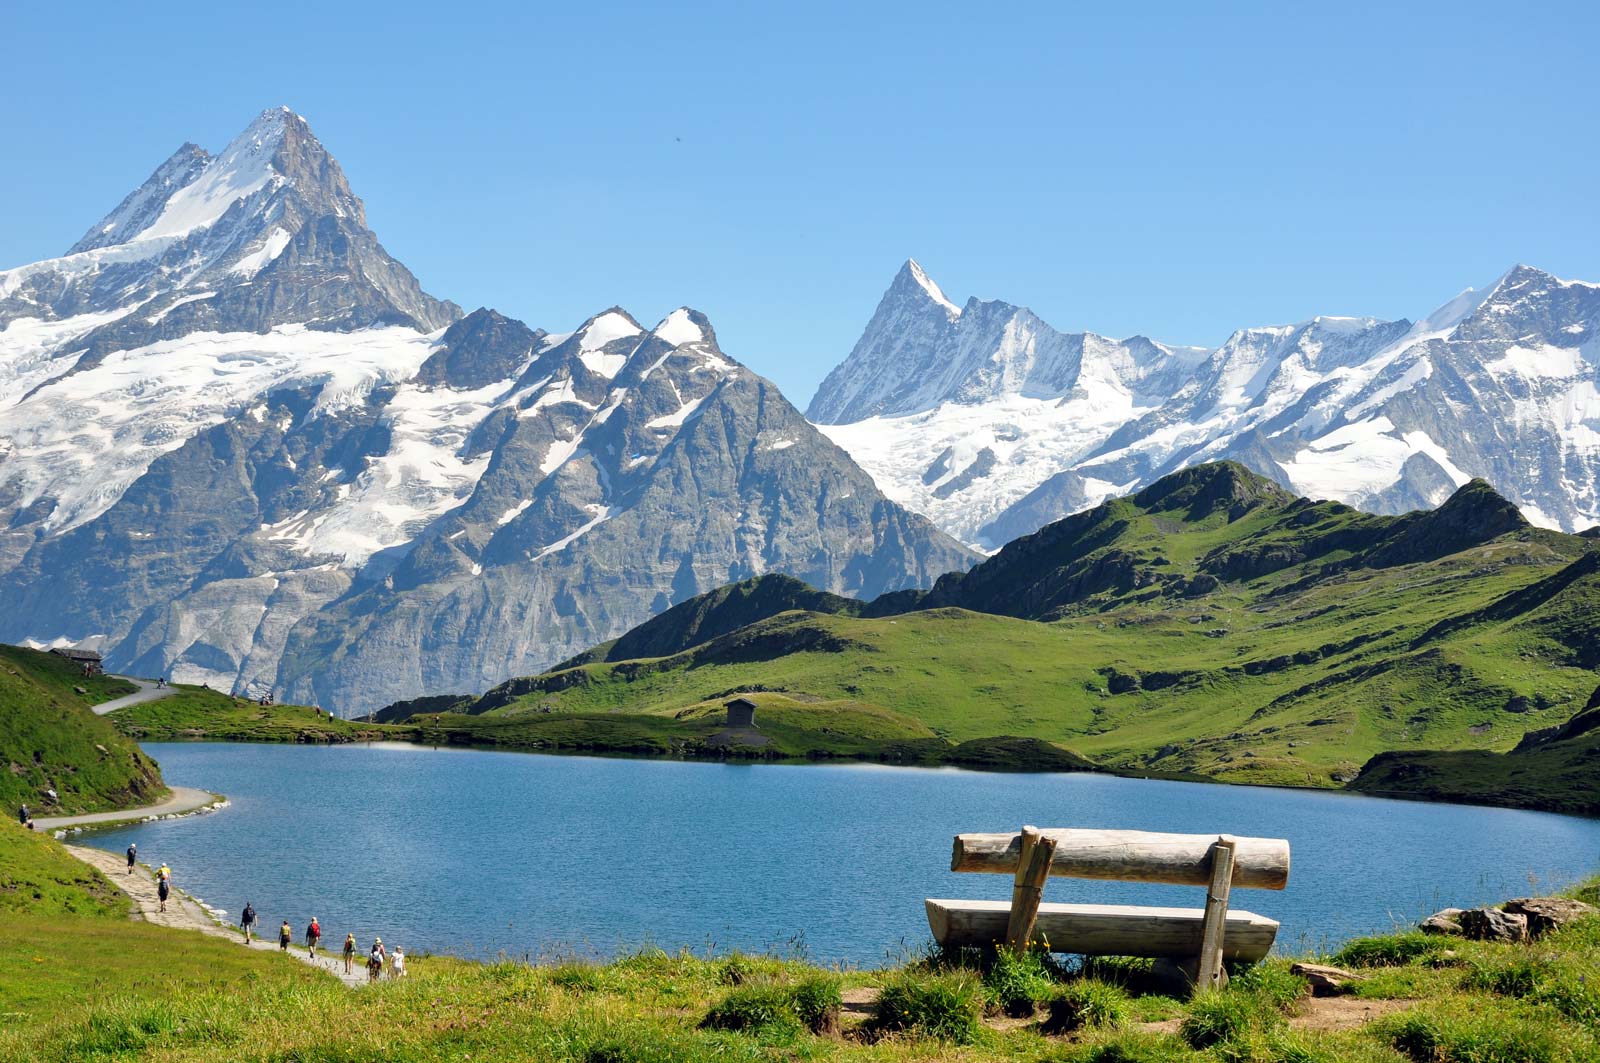 It’s by far the largest mountain range entirely located in Europe